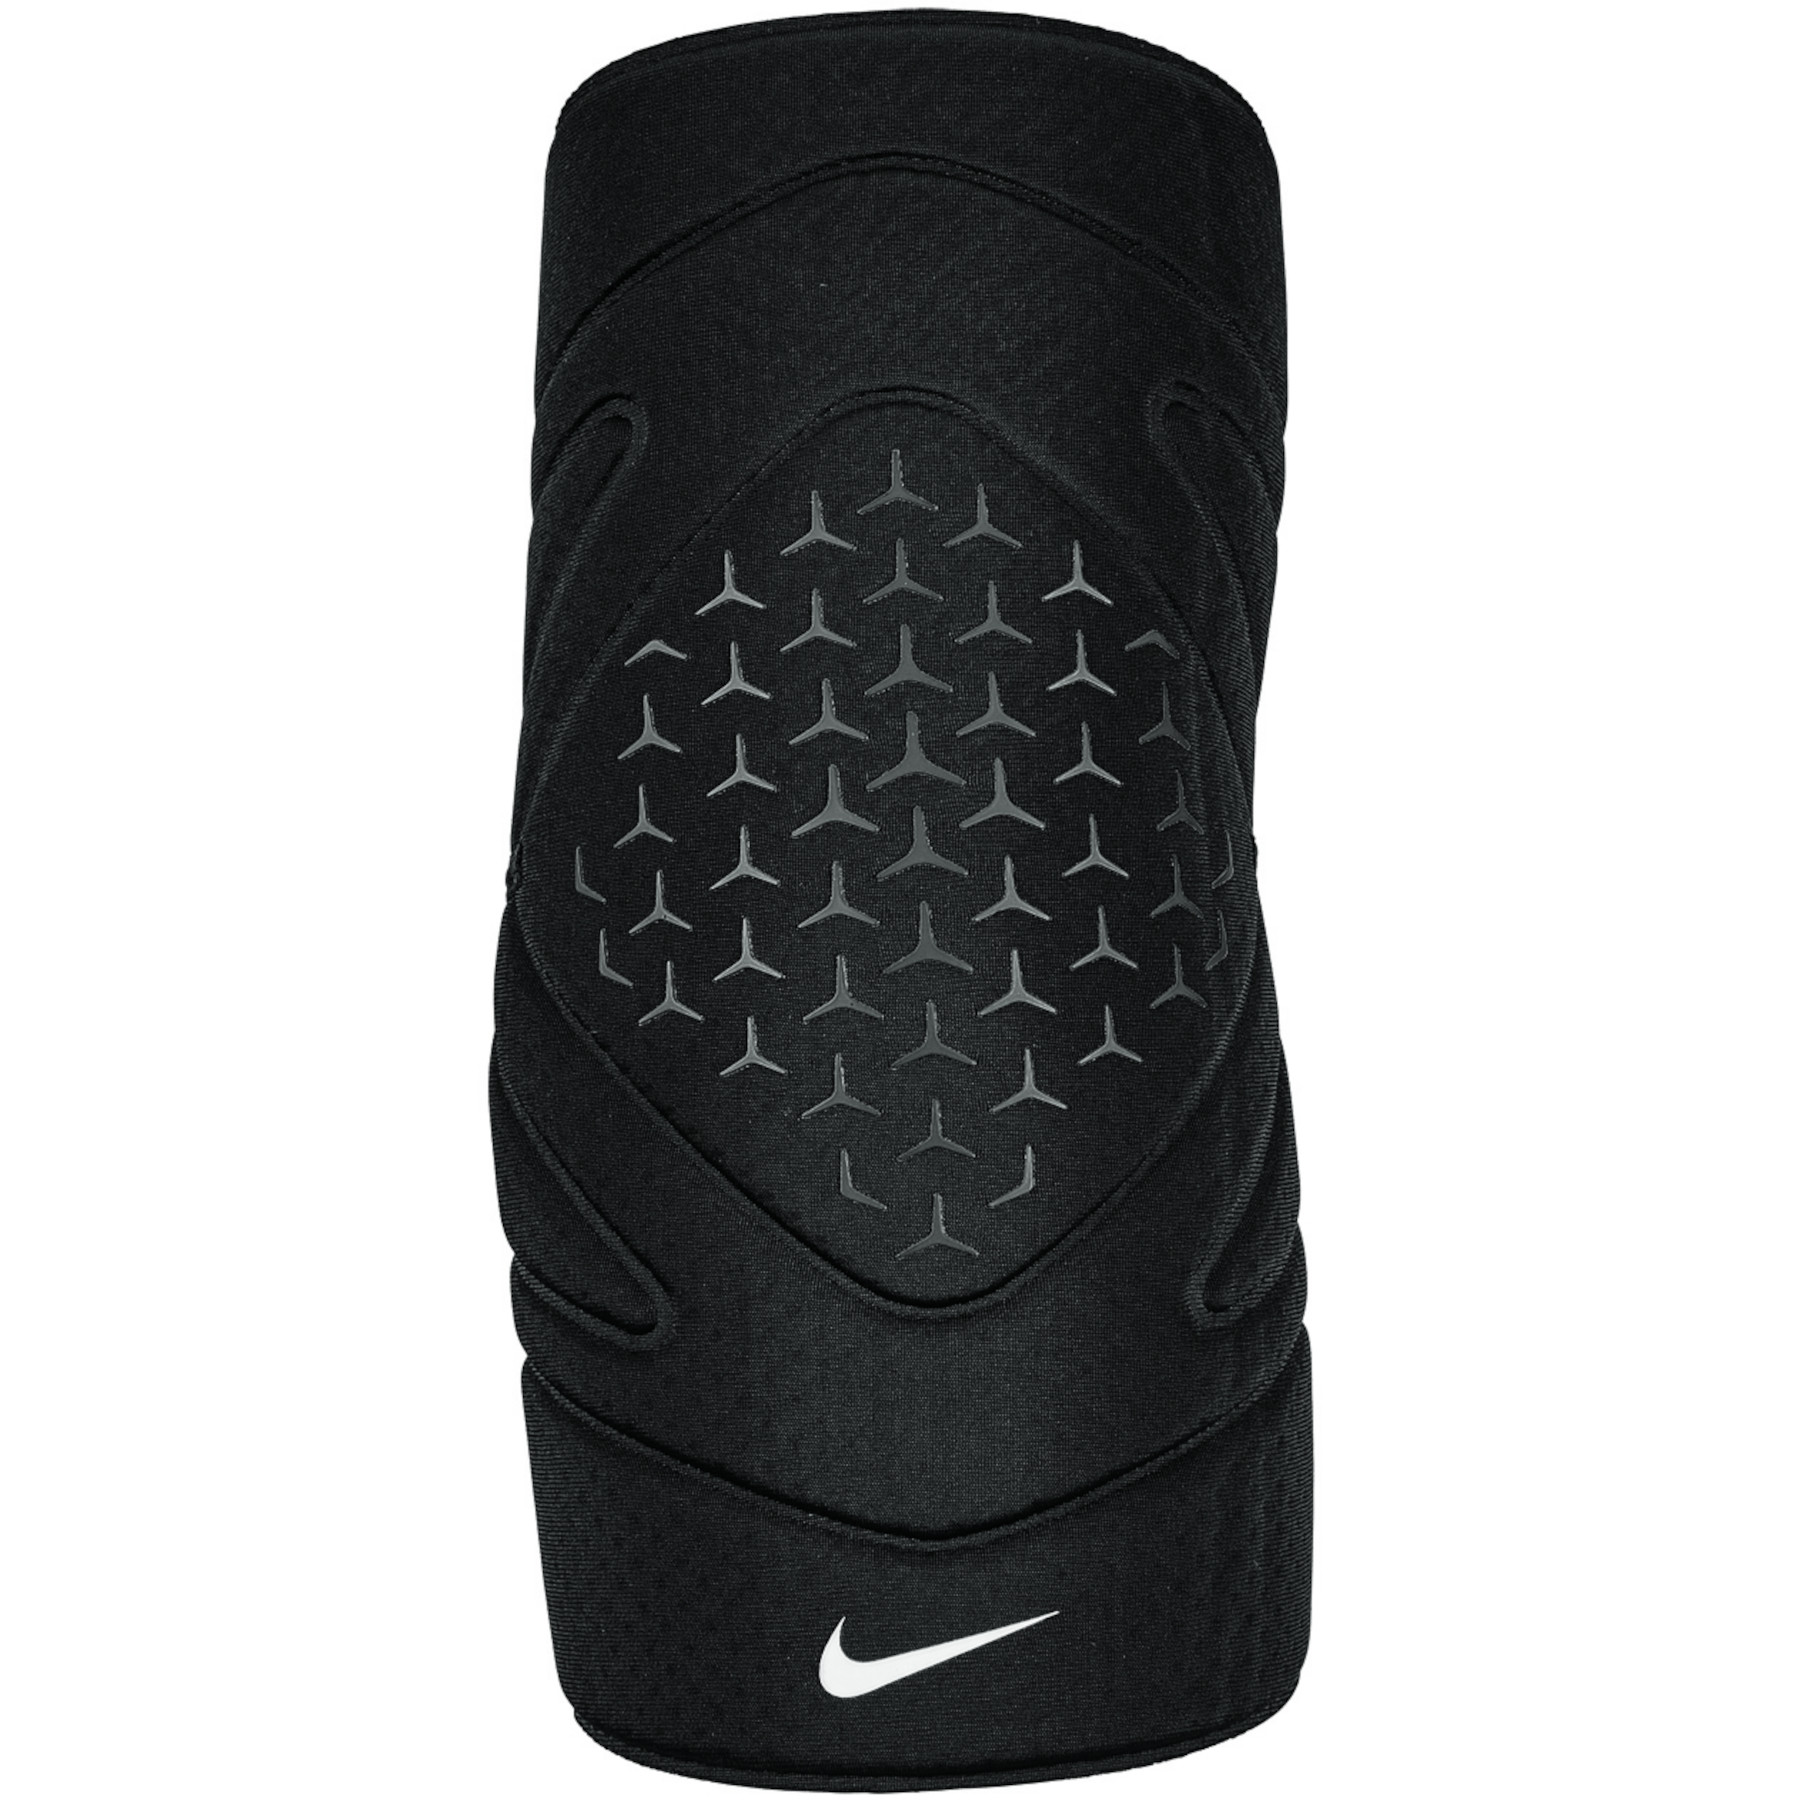 Picture of Nike Pro Elbow Sleeve 3.0 - black/white 010